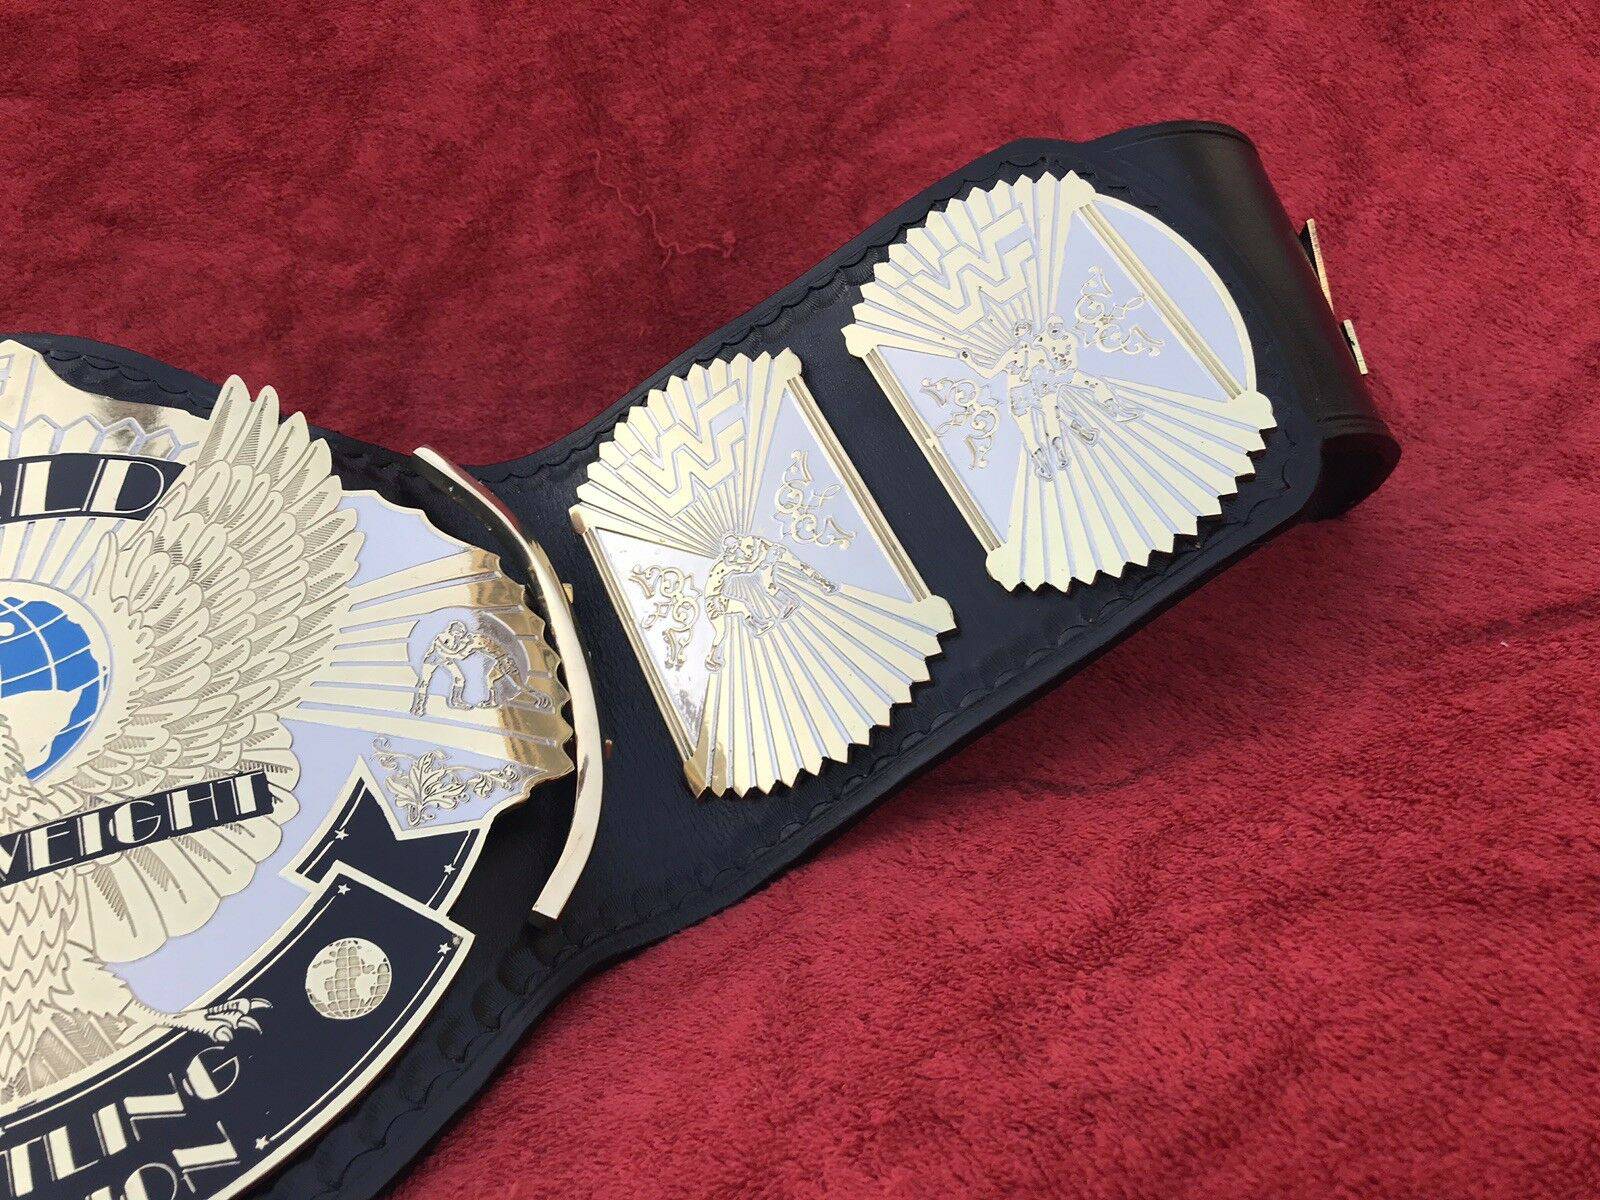 WWF WINGED EAGLE DUAL PLATED Brass Championship Title Belt